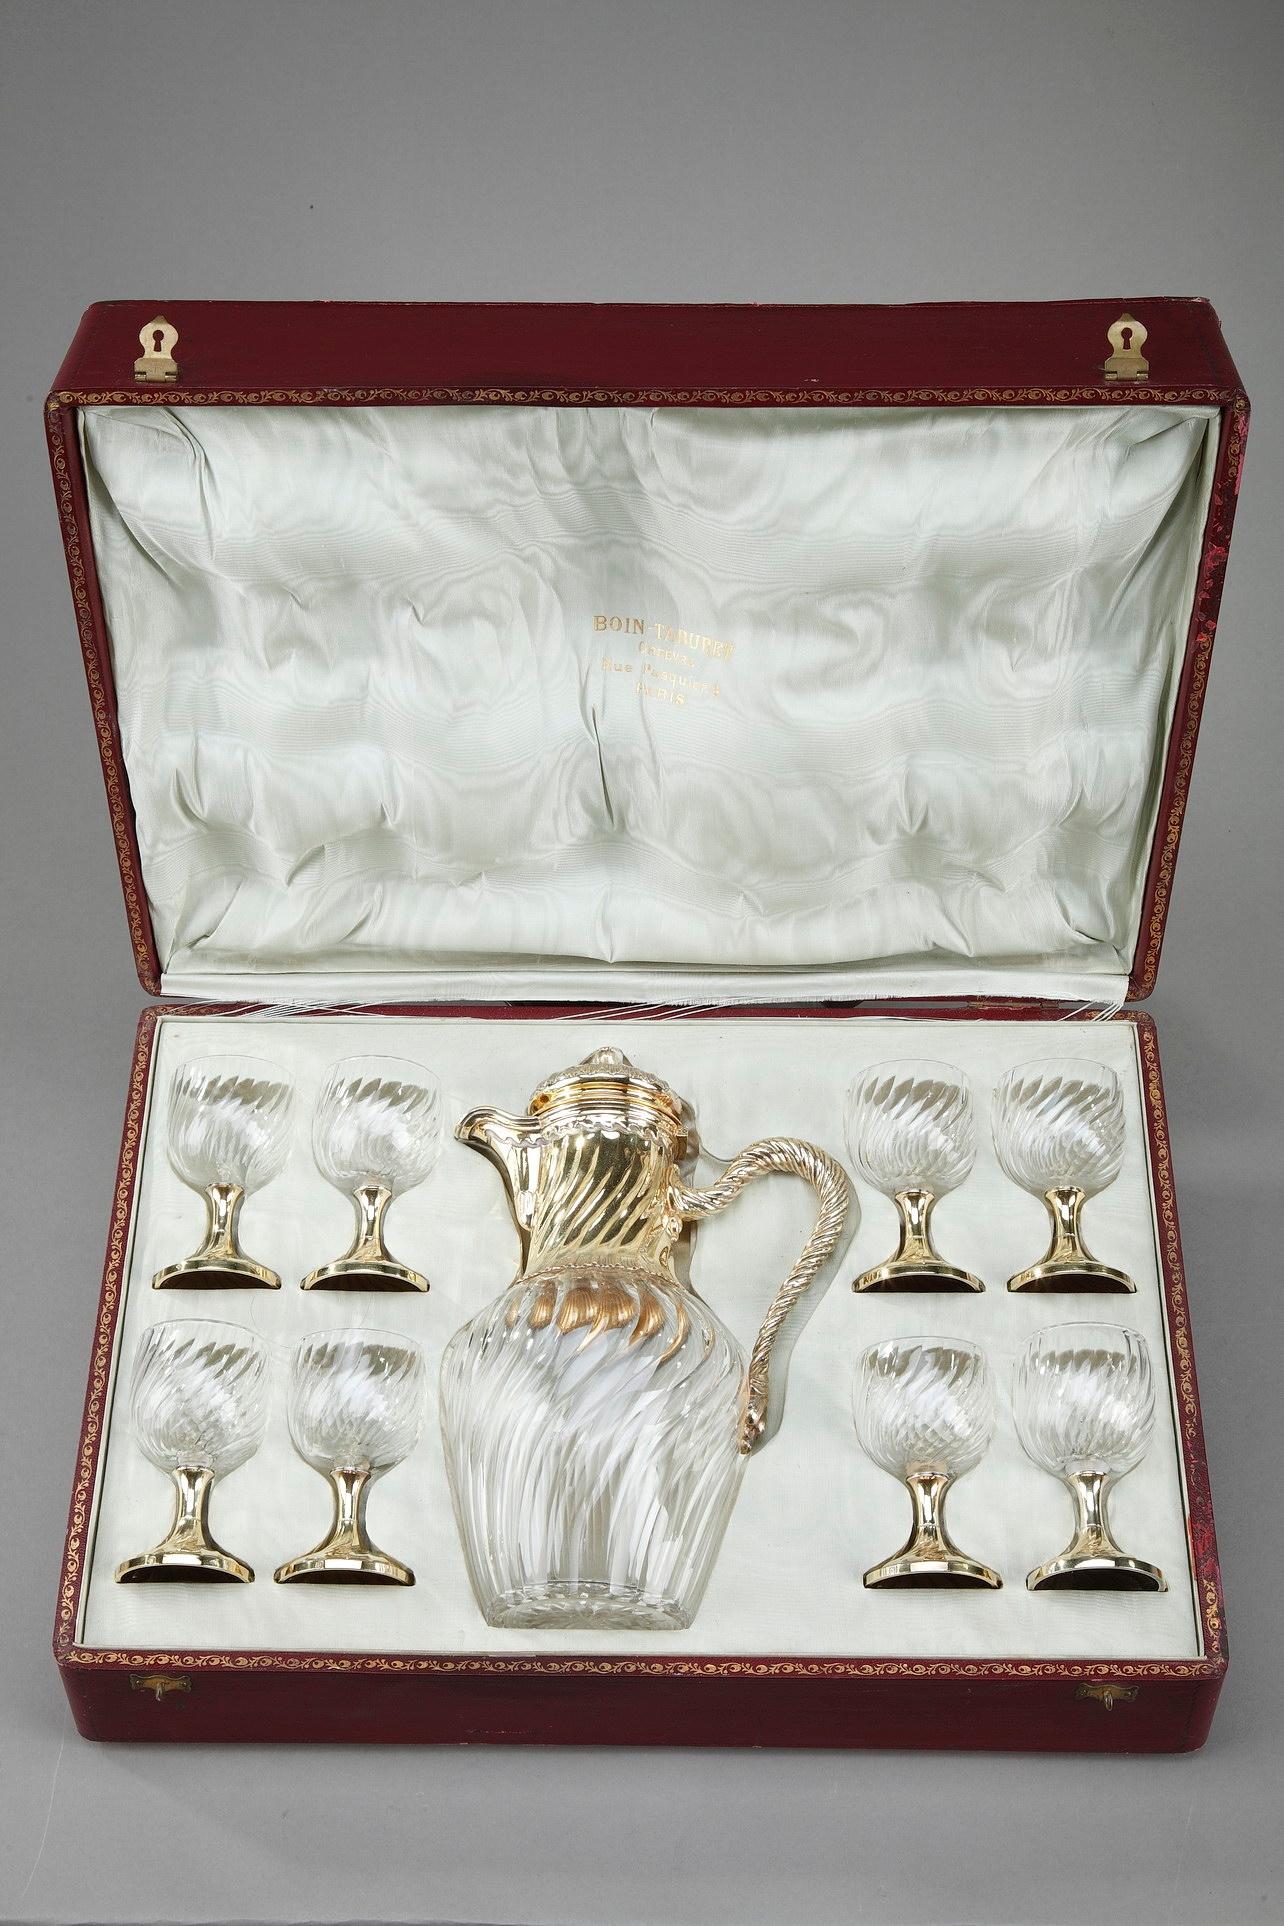 Cut-crystal beverage service with silver-gilt mounts by Maison Boin-Taburet. It is composed of an ewer and 8 glasses highlighted with twisted flutes. The silver-gilt mounts are also decorated with twisted pattern and foliage in Louis XV-style. The